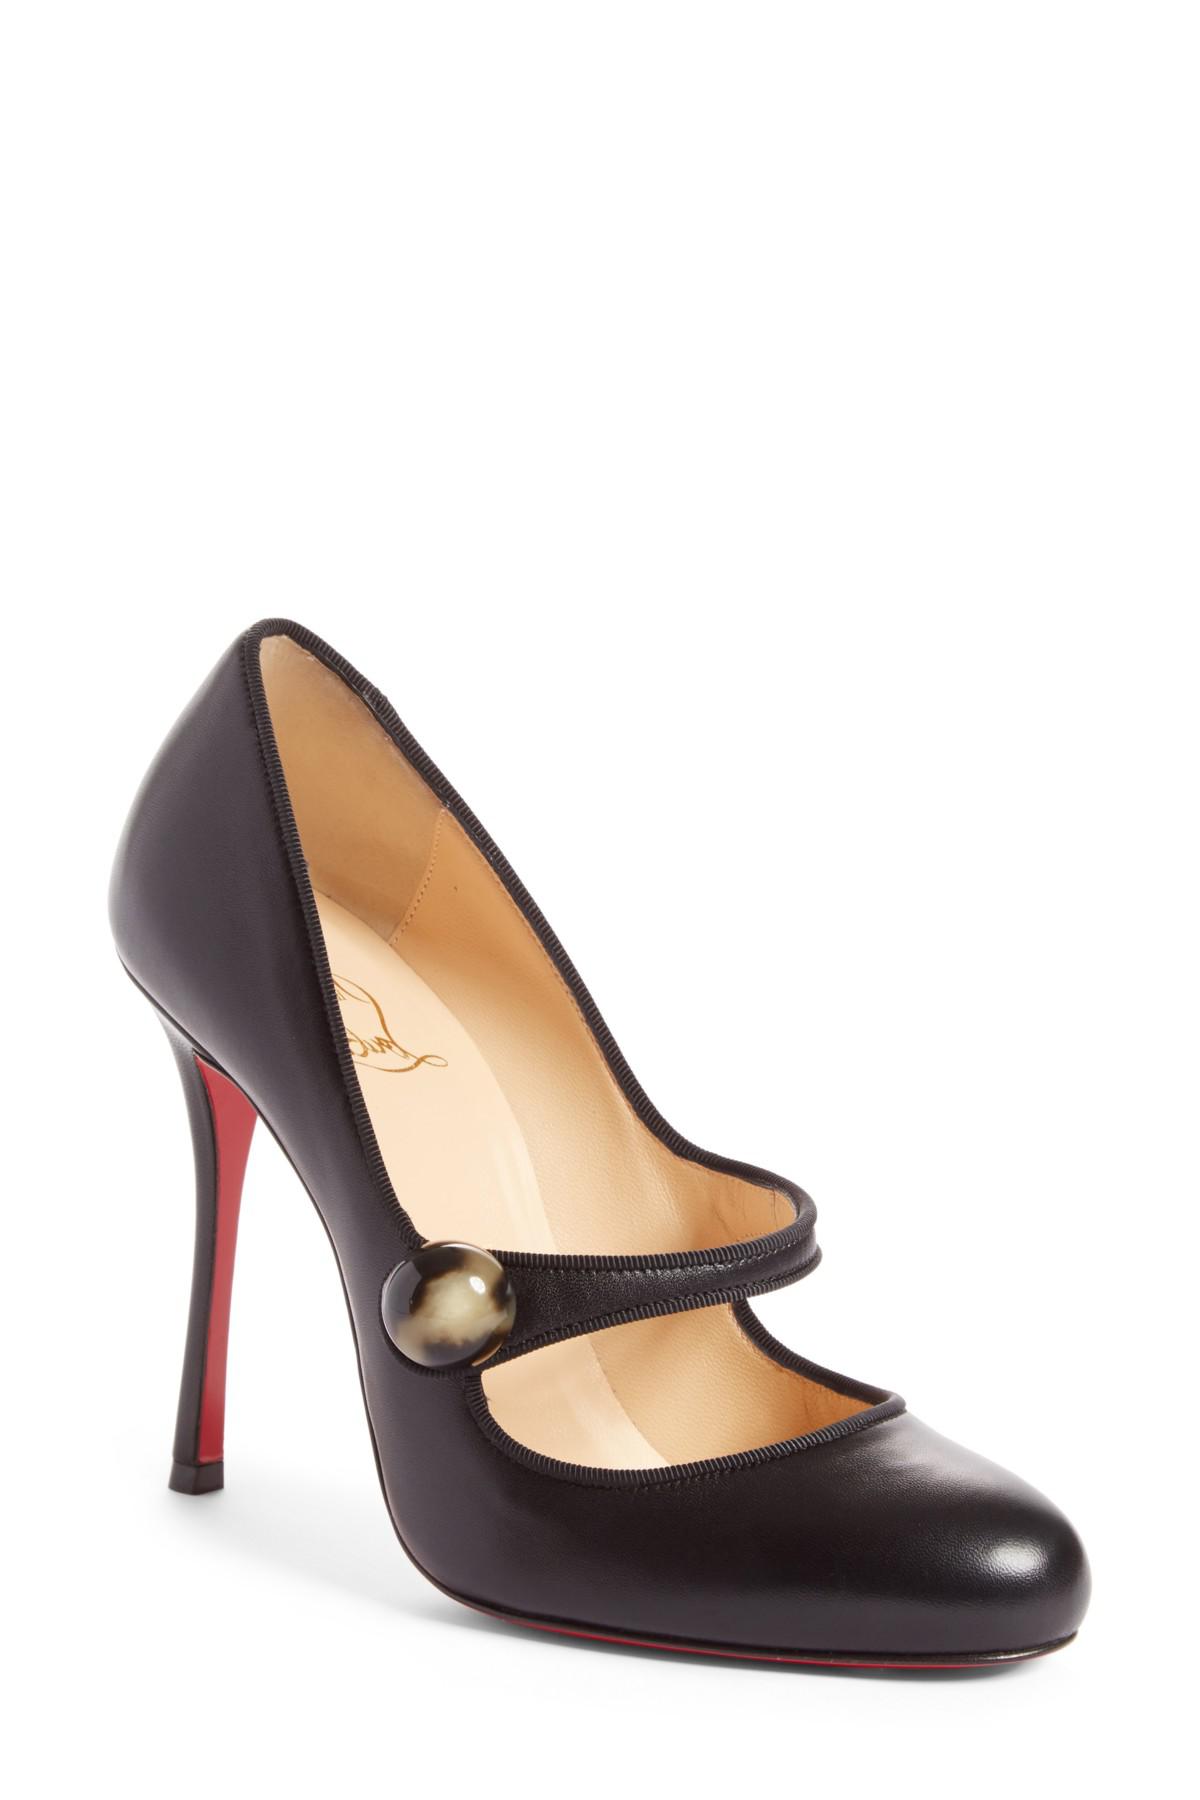 Christian Louboutin Booton Mary Jane Pump in Black | Lyst